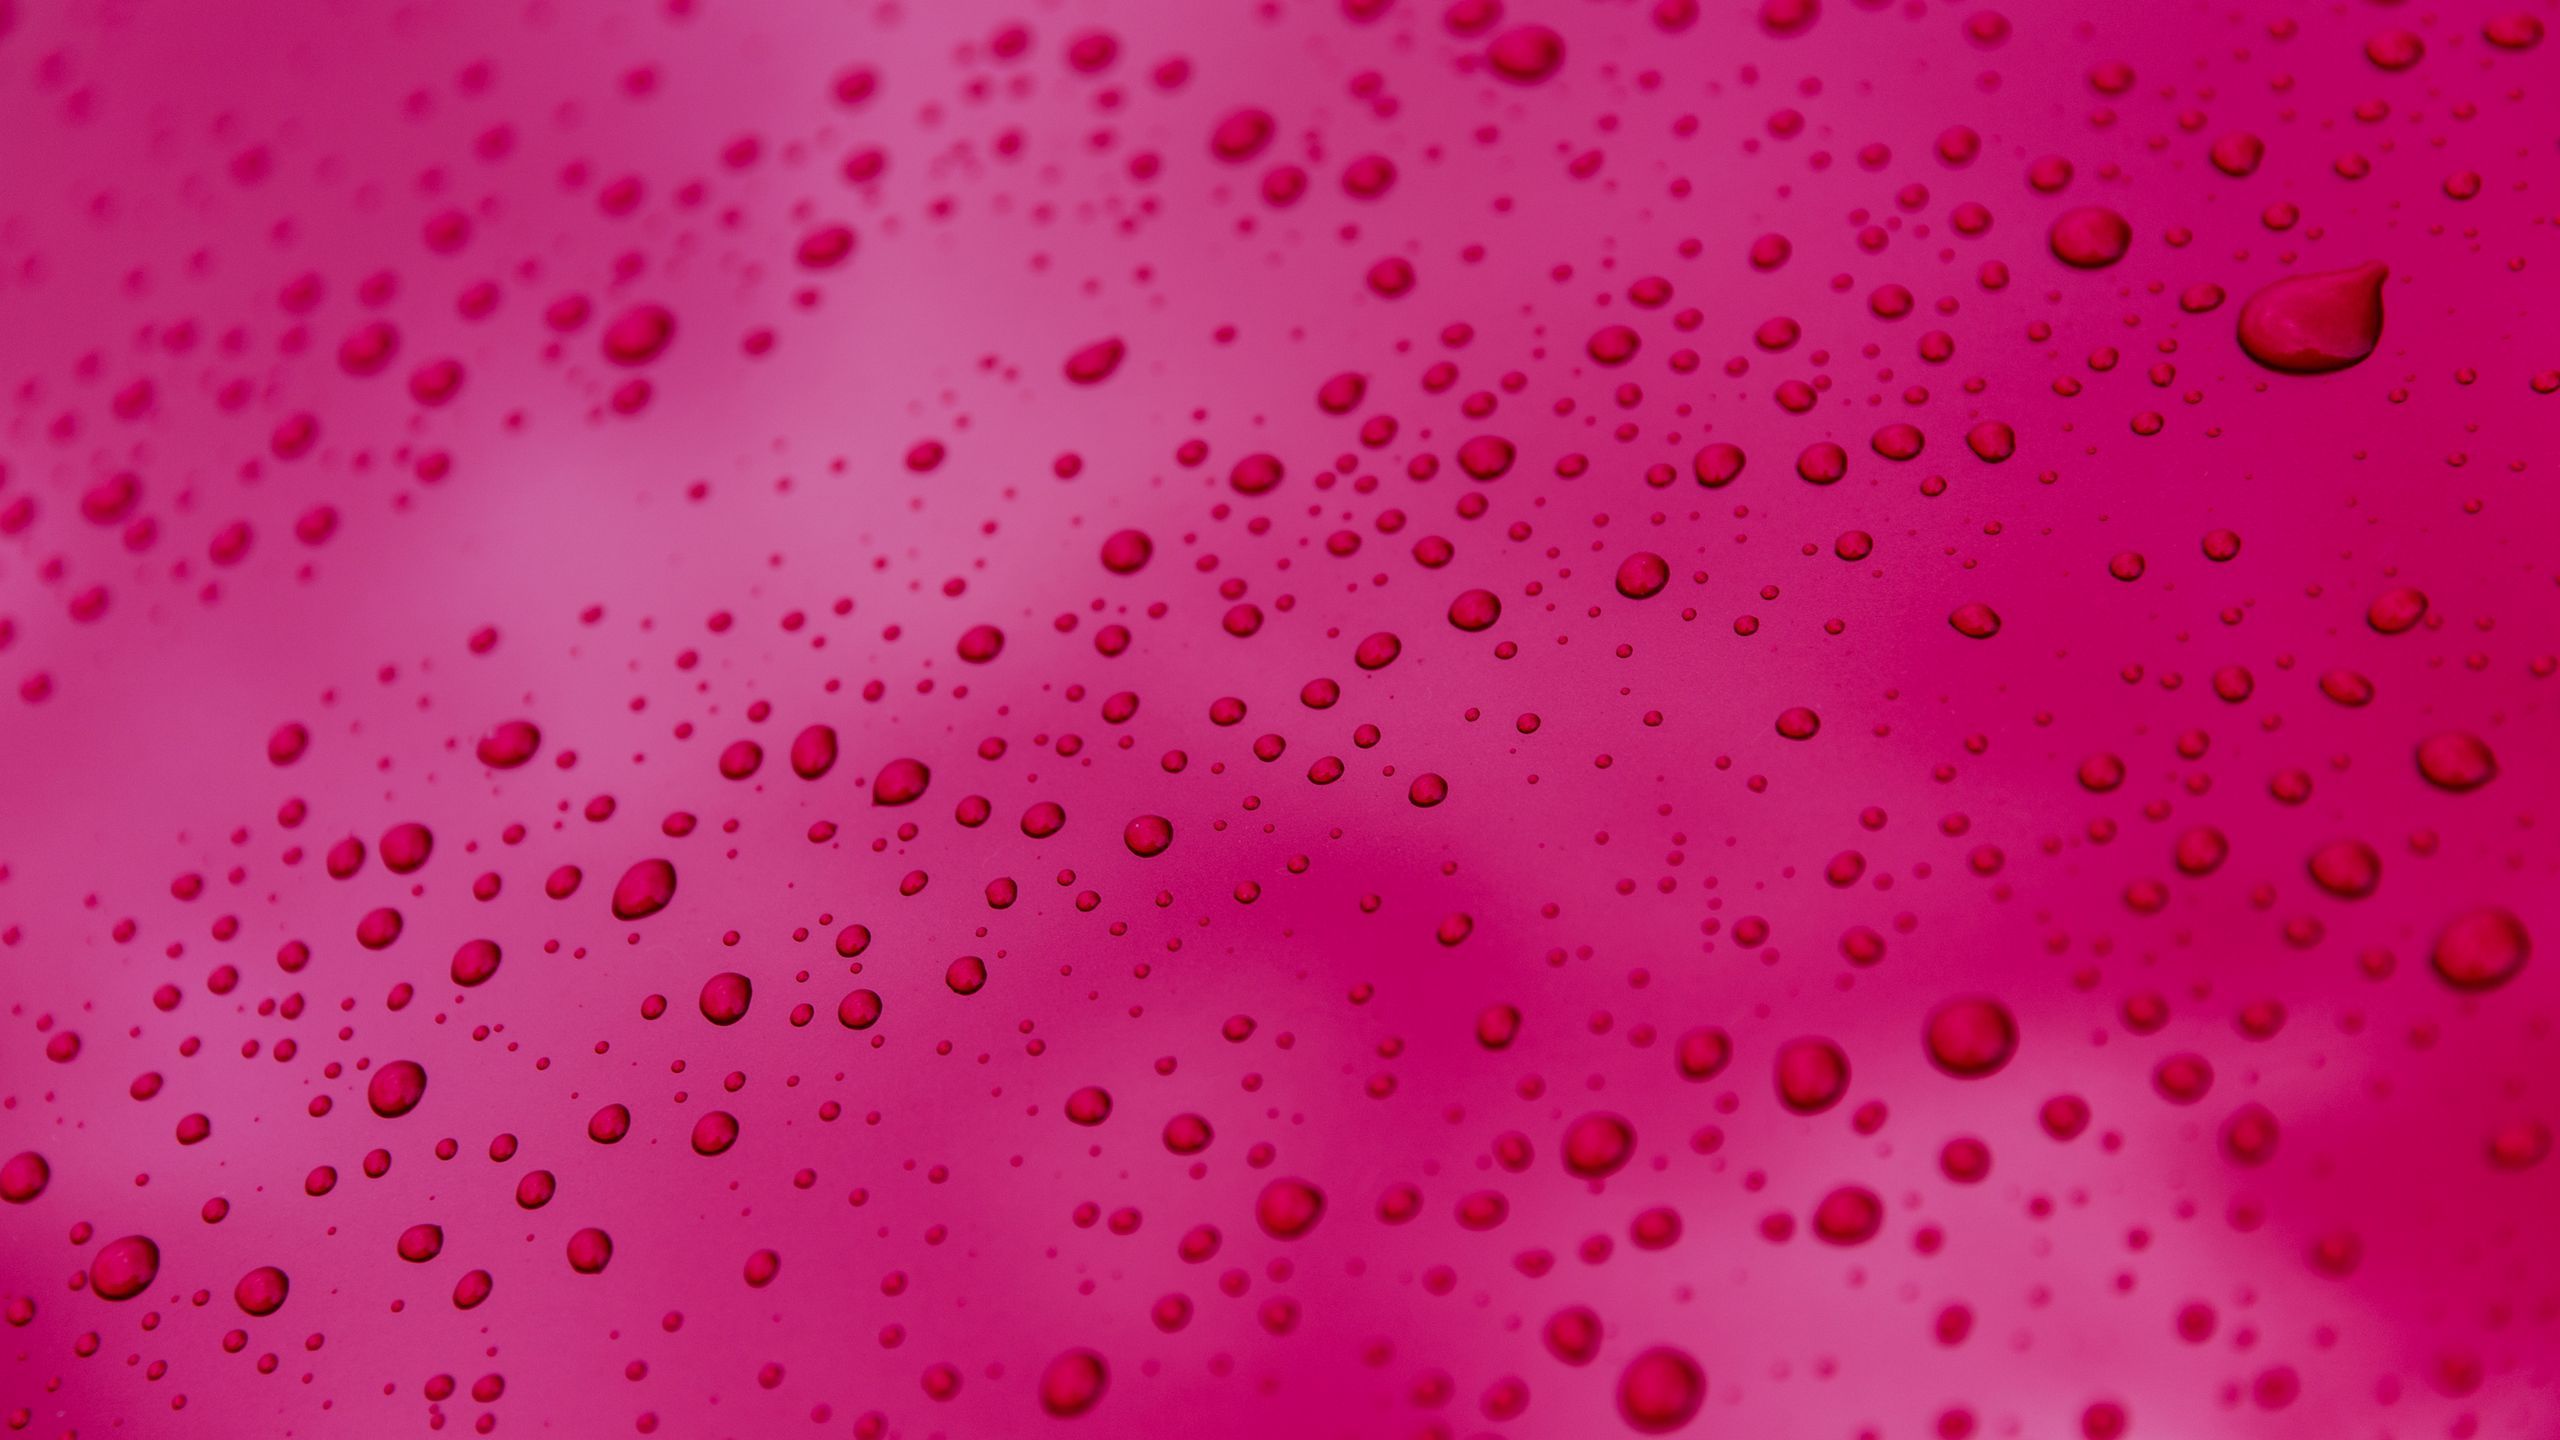 Download wallpaper 2560x1440 surface, drops, pink widescreen 16:9 HD background